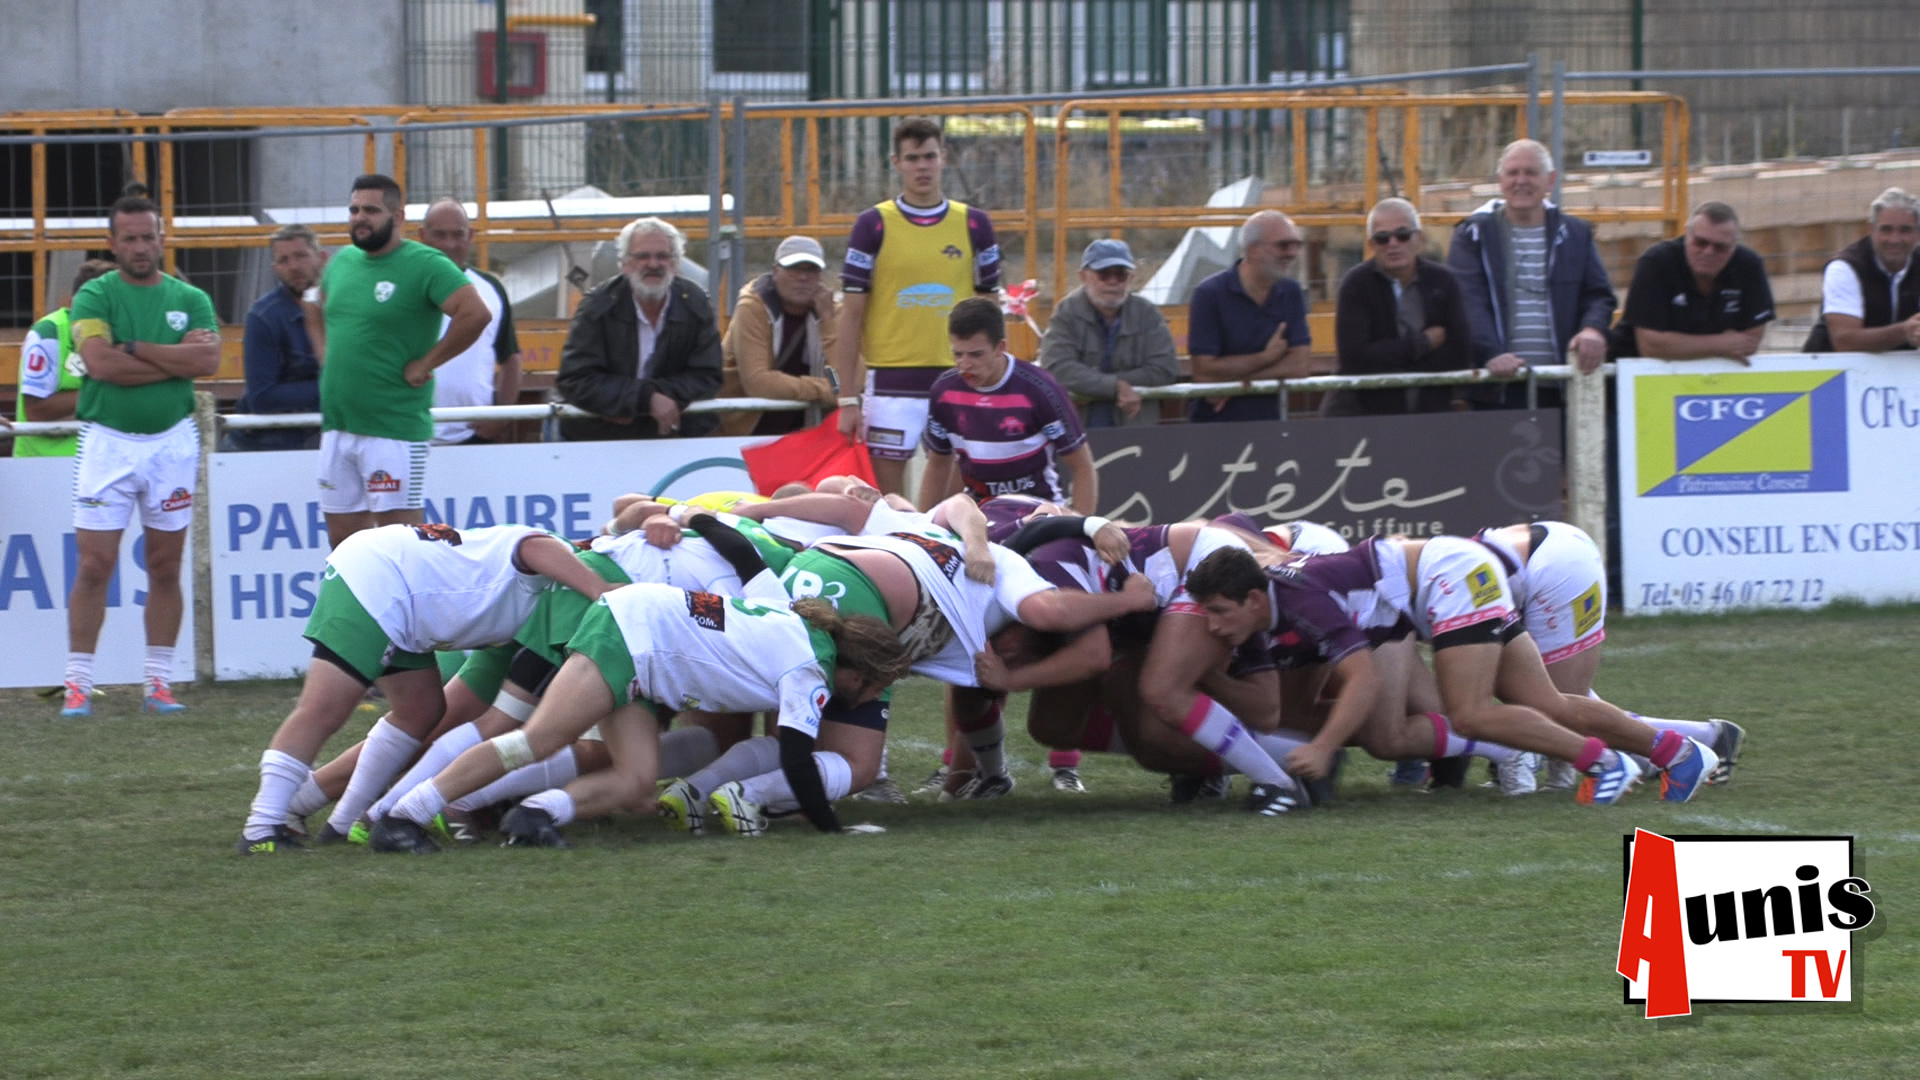 Rugby Marans Limoges